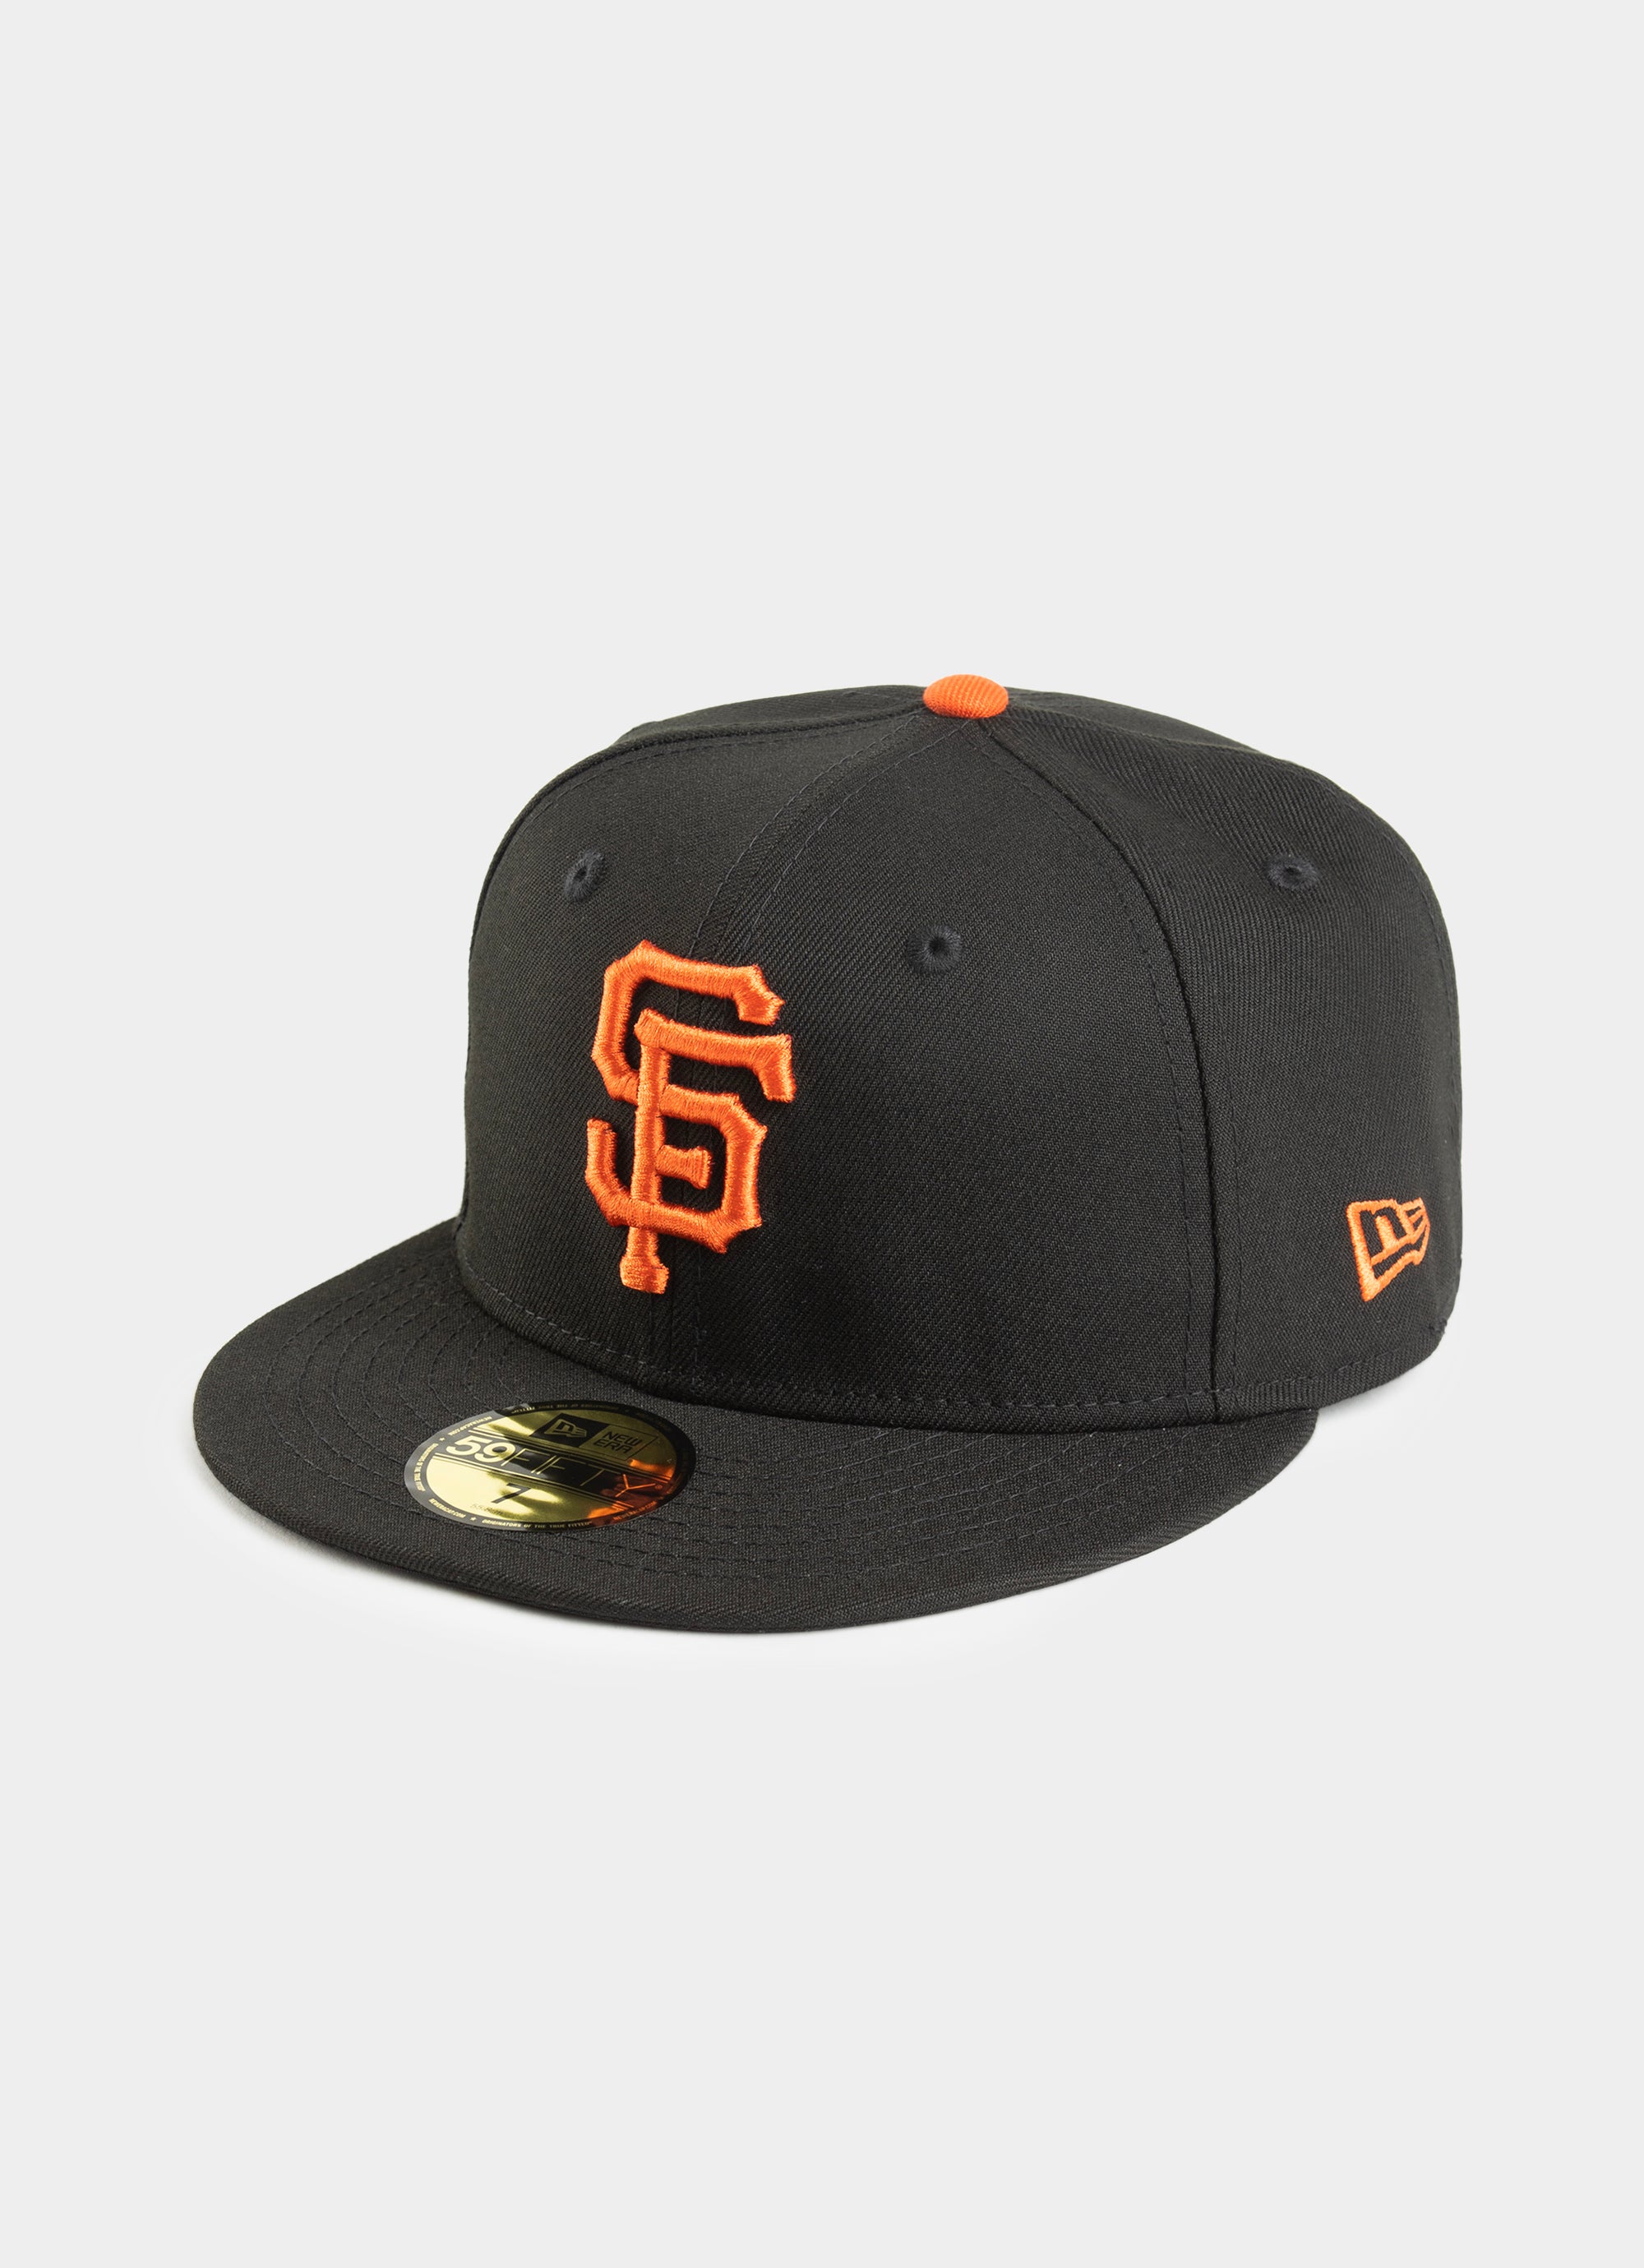 New Era San Francisco Giants Black/Orange Authentic Collection On-Field 59FIFTY Performance Fitted H